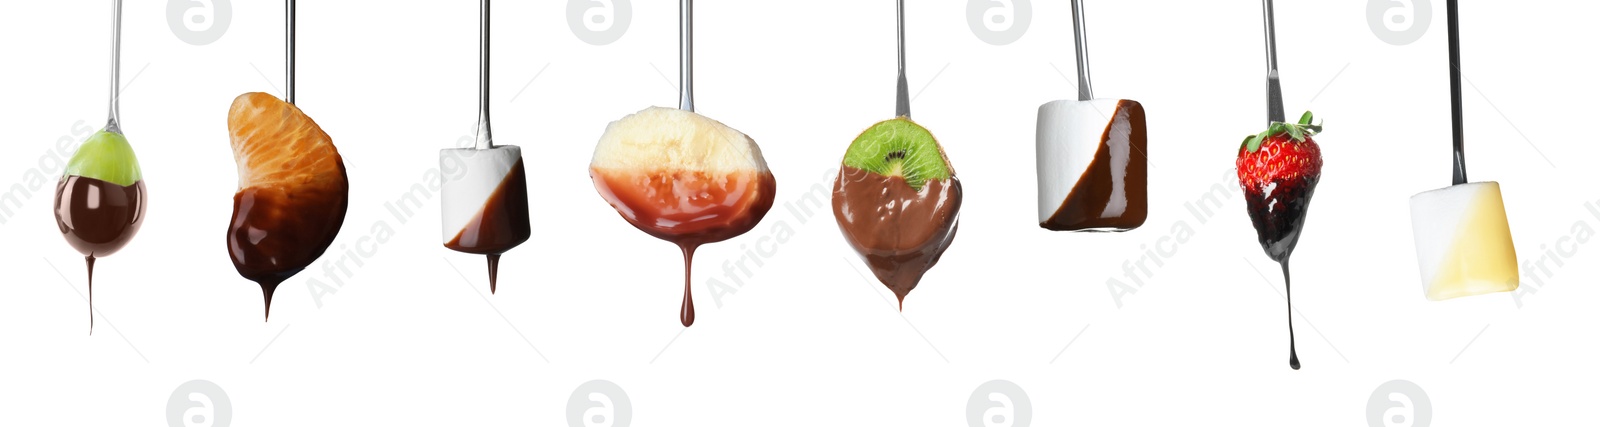 Image of Fondue forks with tasty fruits and marshmallows dipped into chocolate on white background, collage. Banner design